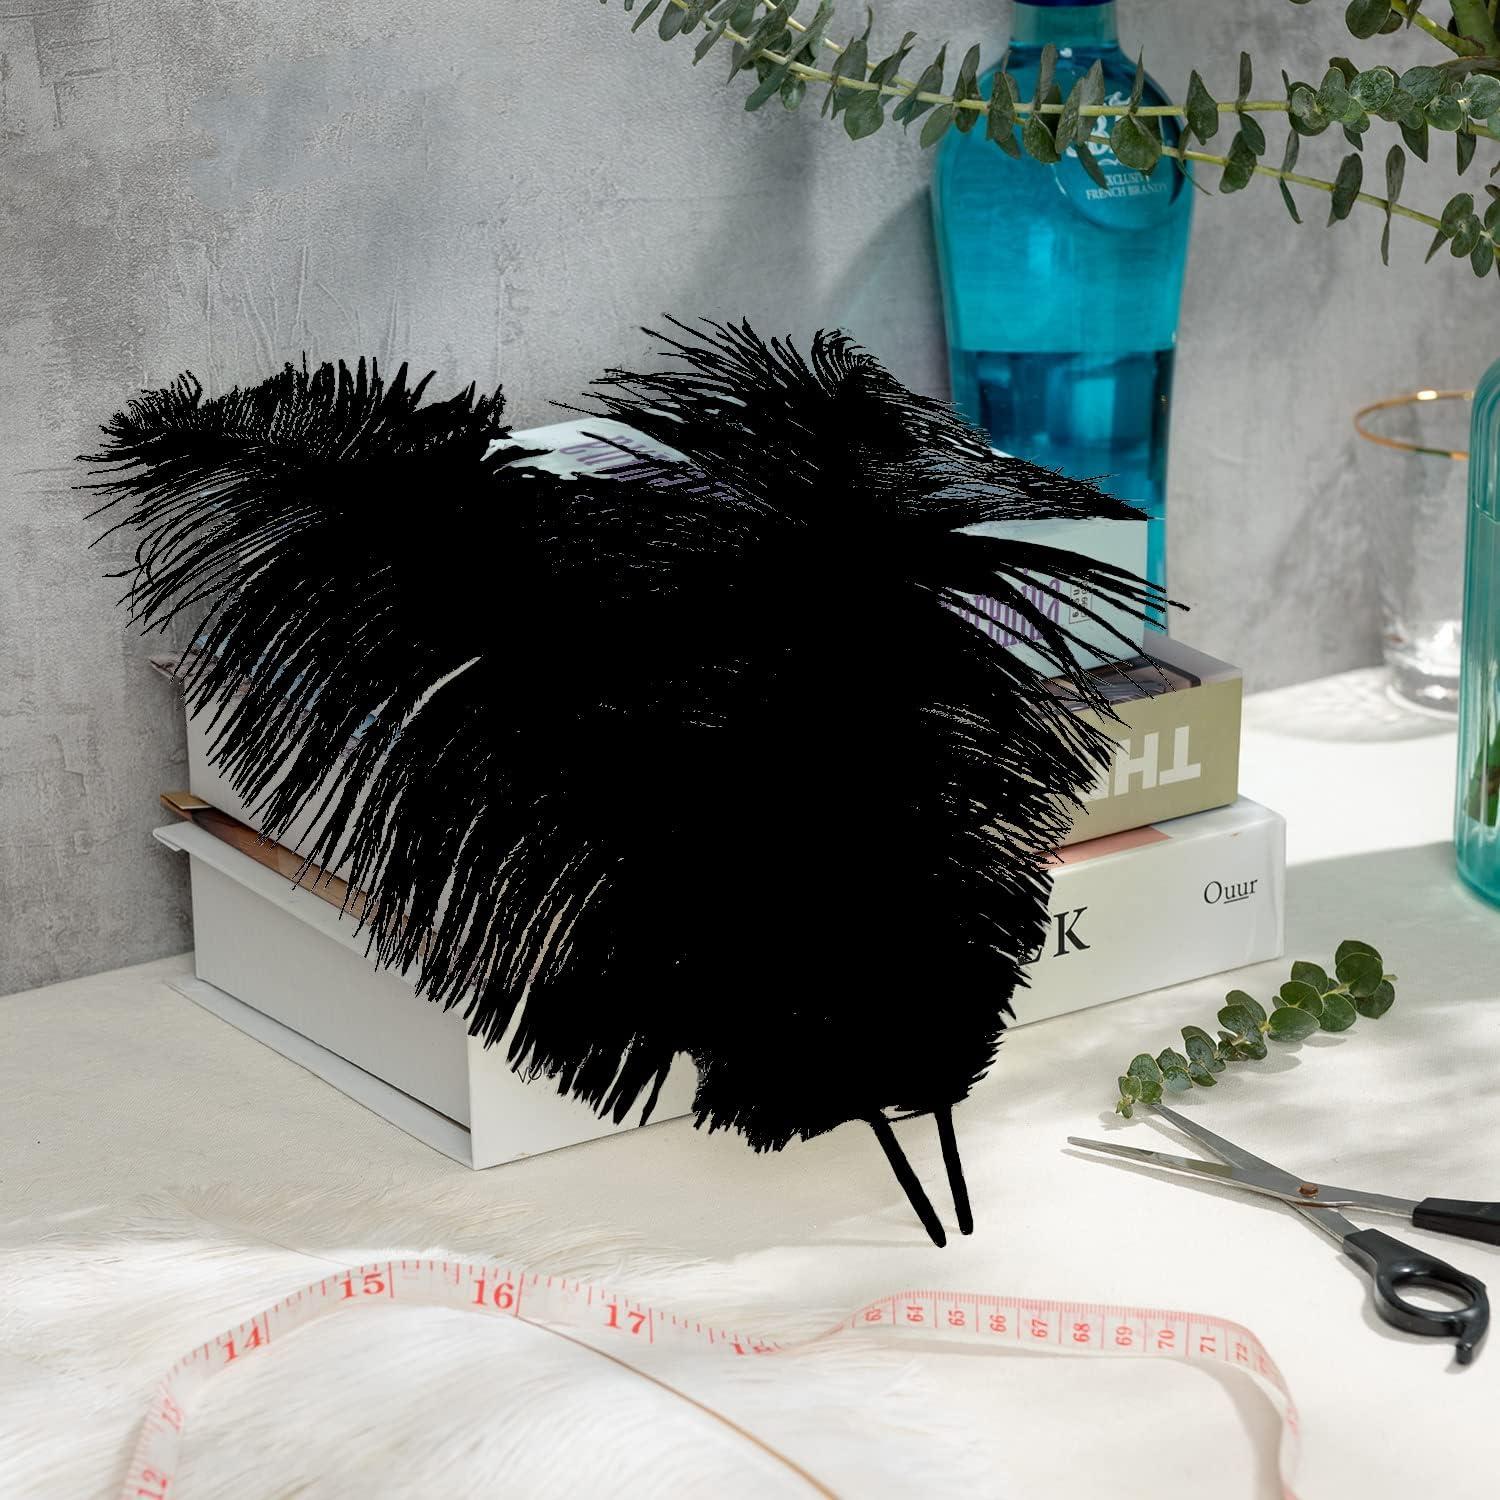 Piokio 20 pcs Natural Black Ostrich Feathers Plumes 8-10 inch(20-25 cm)  Bulk for DIY Halloween Decorations Wedding Party Centerpieces Gatsby  Decorations Black 8-10